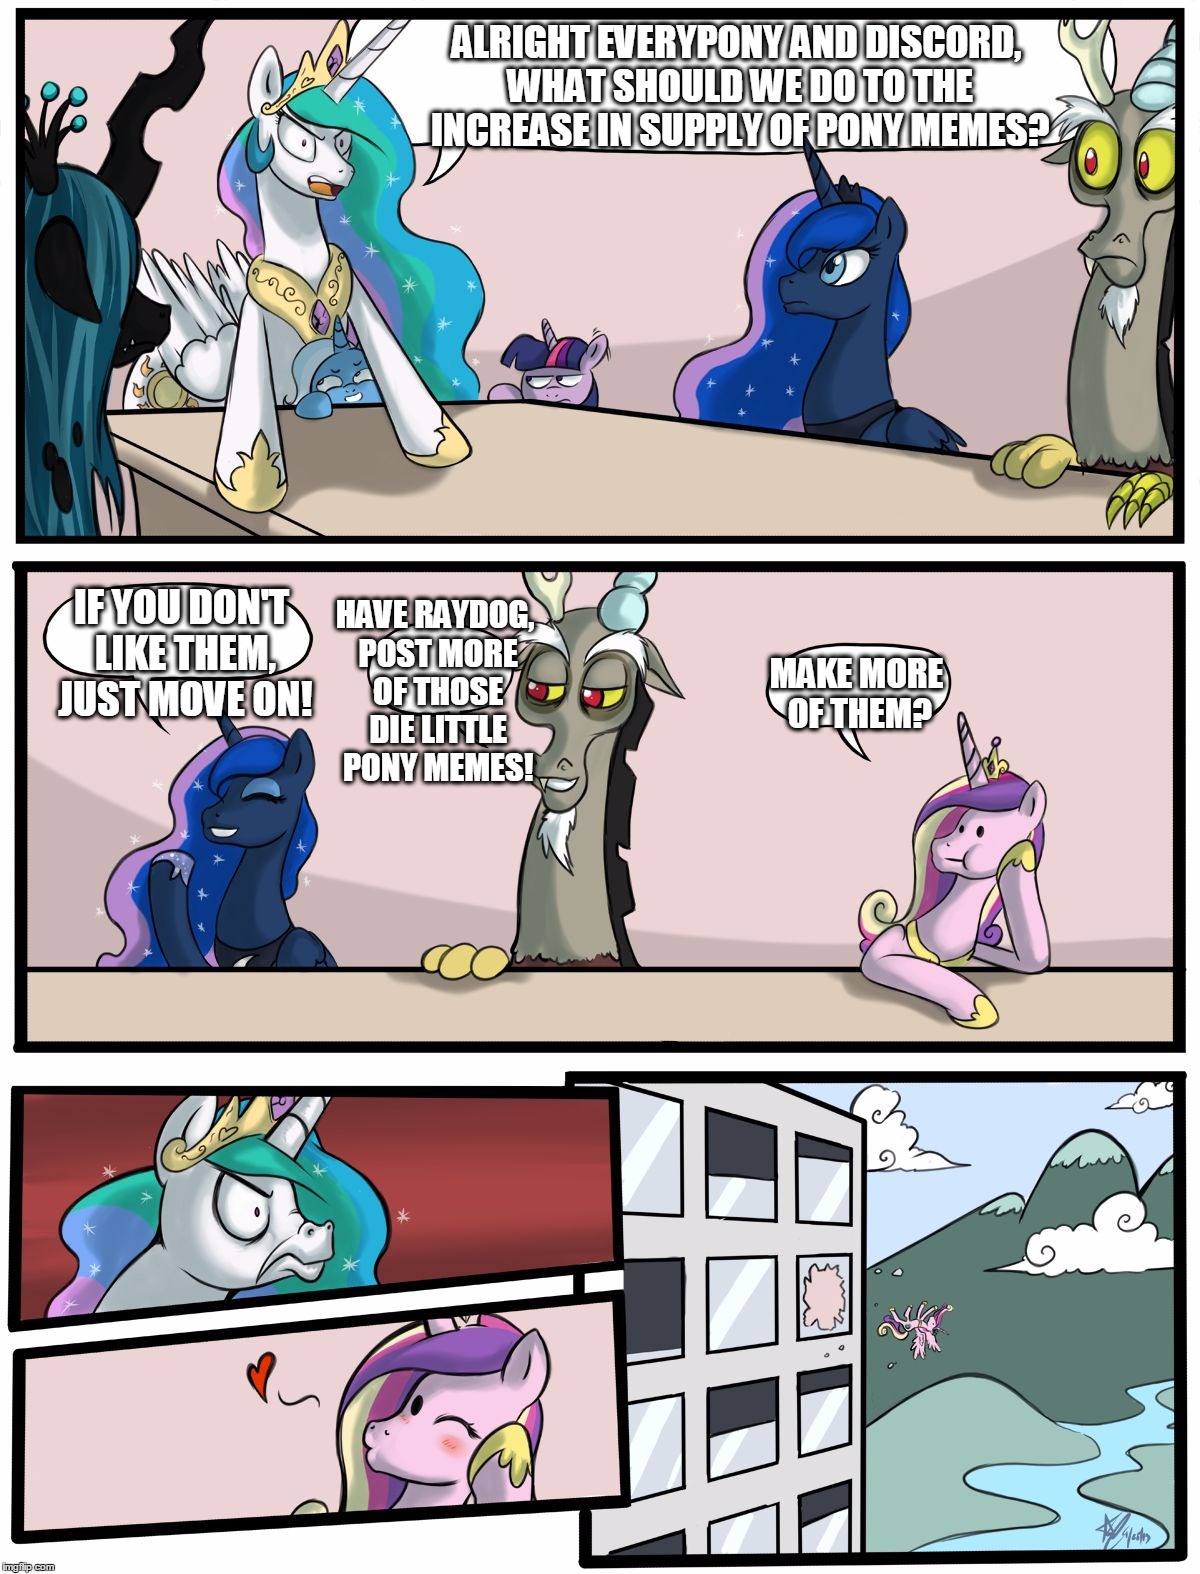 Boardroom Meeting Suggestion Pony Version | ALRIGHT EVERYPONY AND DISCORD, WHAT SHOULD WE DO TO THE INCREASE IN SUPPLY OF PONY MEMES? HAVE RAYDOG, POST MORE OF THOSE DIE LITTLE PONY MEMES! IF YOU DON'T LIKE THEM, JUST MOVE ON! MAKE MORE OF THEM? | image tagged in boardroom meeting suggestion pony version,memes,boardroom meeting suggestion,mlp,my little pony,funny | made w/ Imgflip meme maker